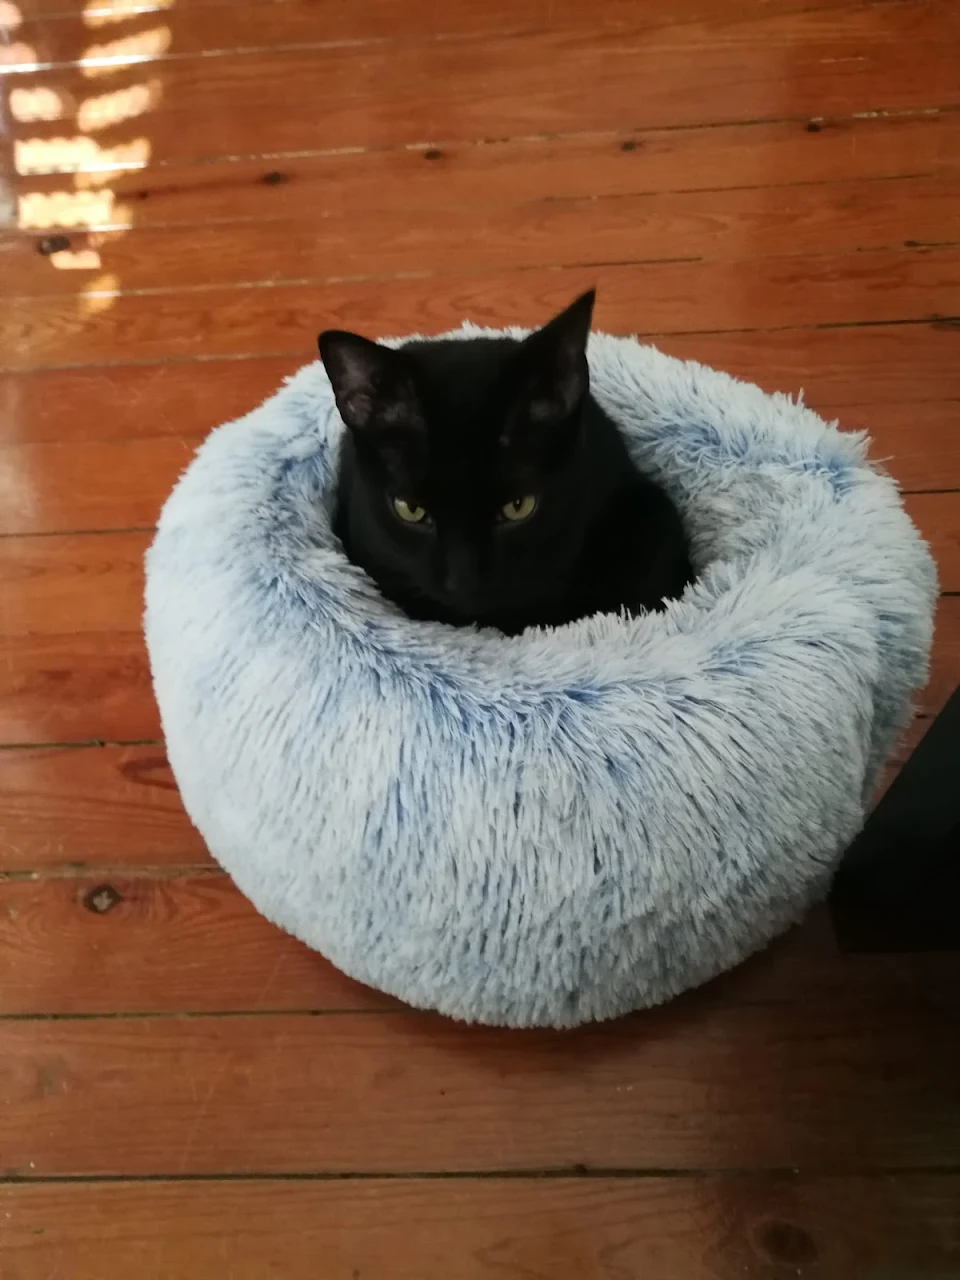 We bought this bed about seven months ago. Today, Tito decided to try it for the first time.